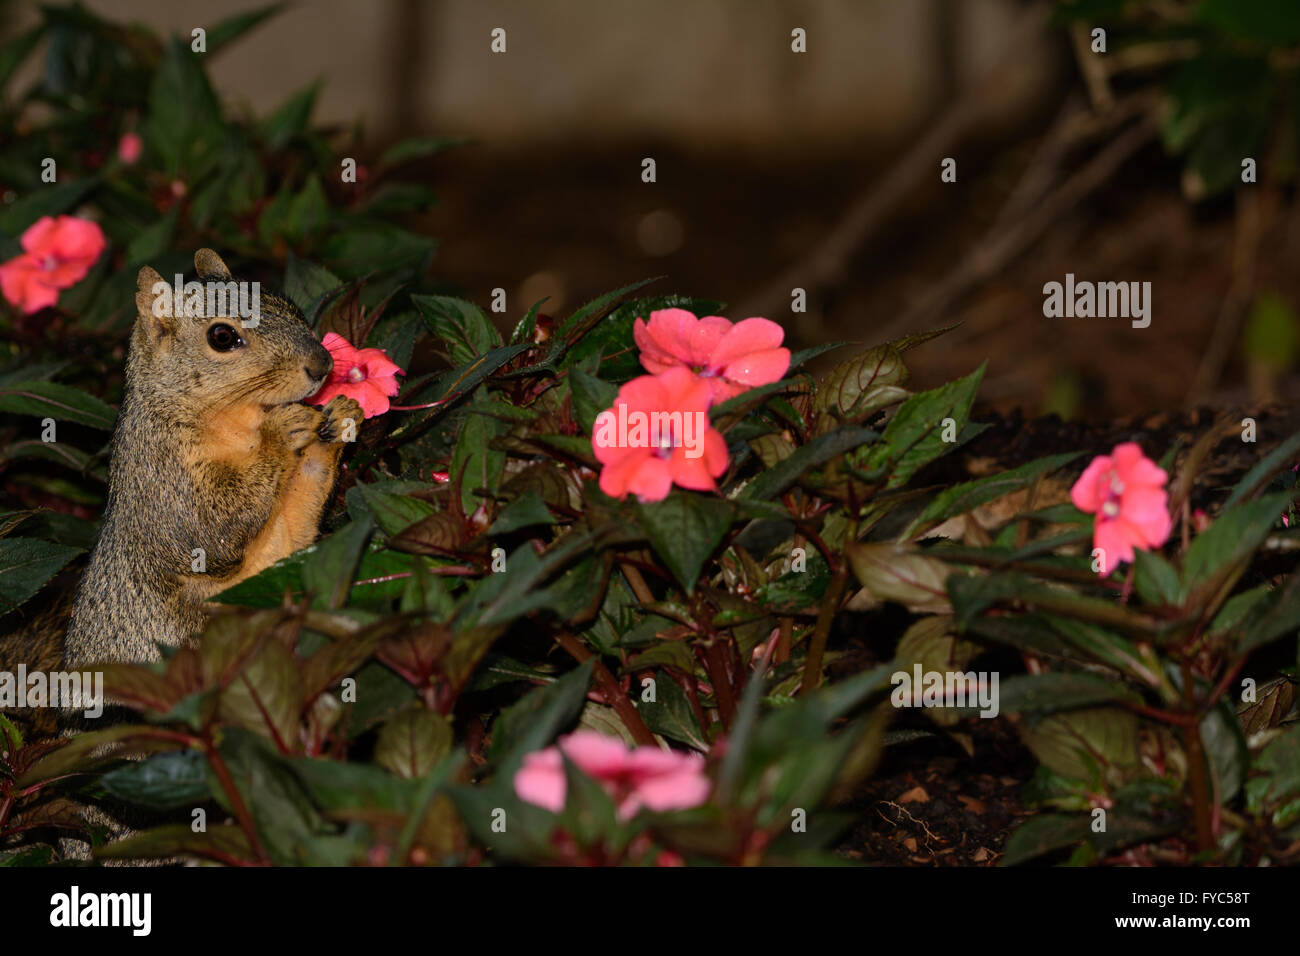 Shopping for Mothers Day Flowers? Fox Squirrel Standing upright in a bed of New Guinea Impatient flowers as if trying to choose Stock Photo